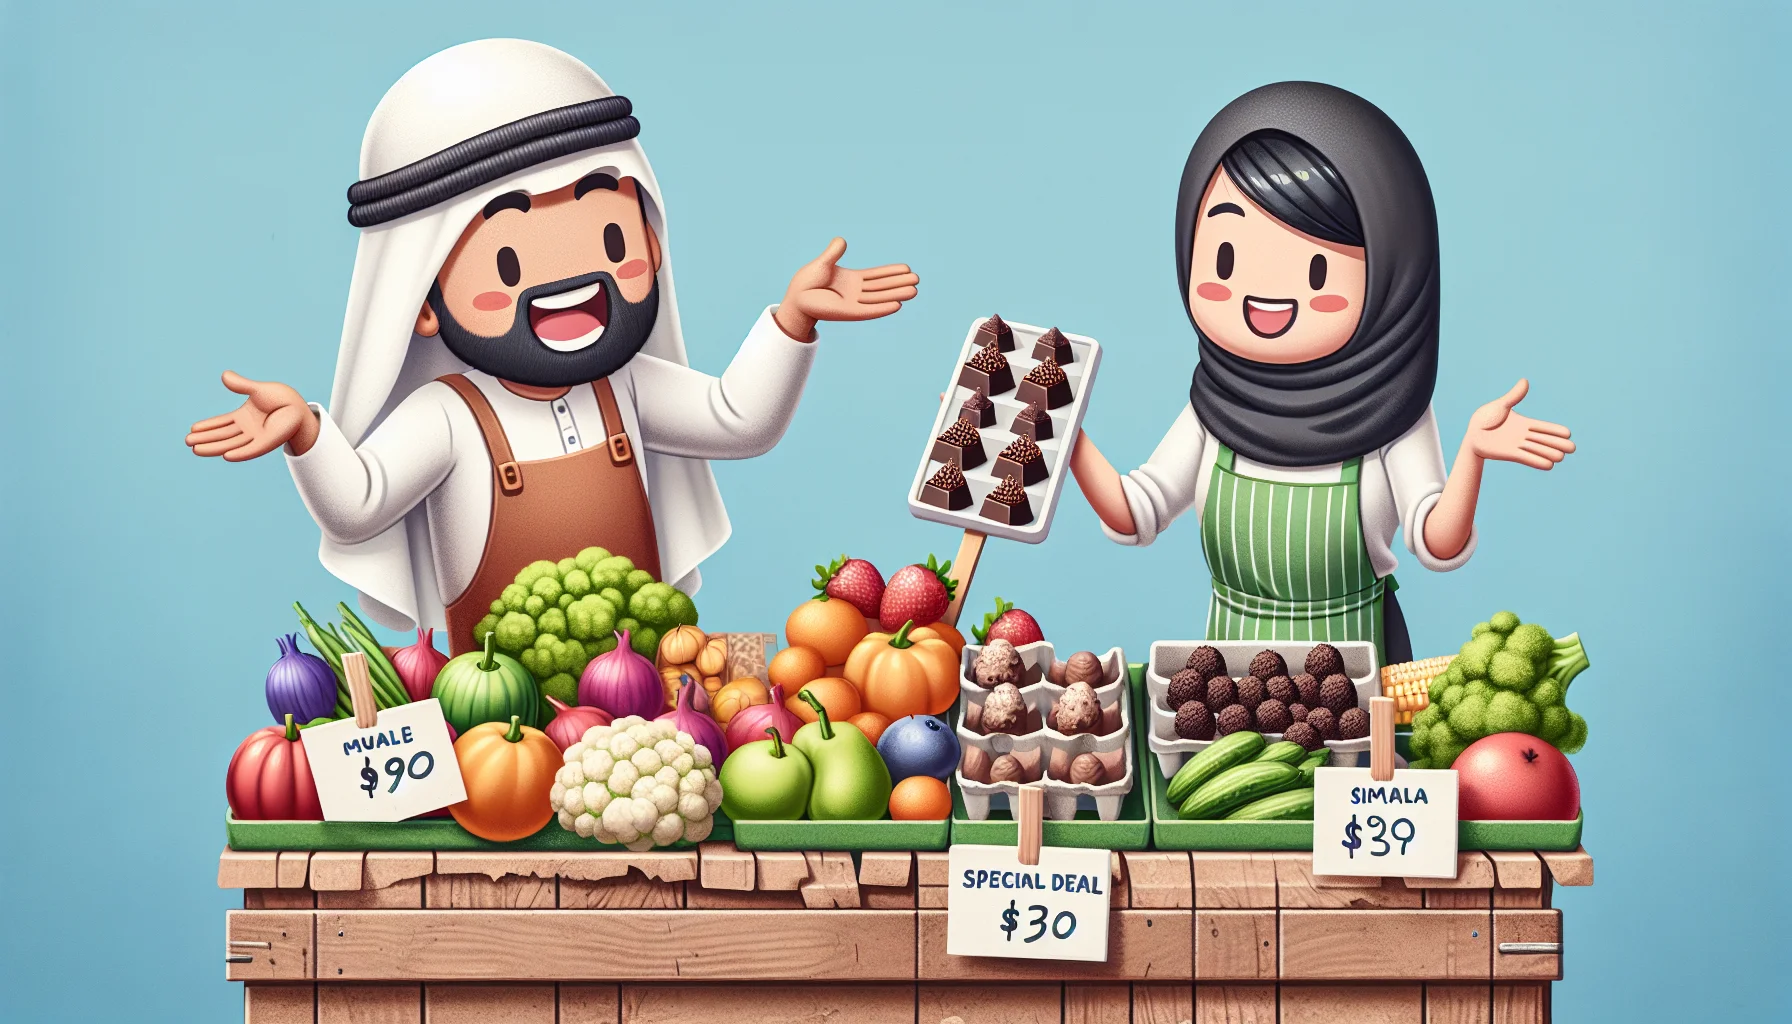 Create a fun and humorous image of a playful scene at a farmer's market. A Middle-Eastern male vendor passionately advocates about the benefits of healthy eating and offers a special deal. His stand is attractively loaded with an assortment of fresh, colorful fruits and vegetables. Right next to him, an Asian woman presents a tray of Simple Fudgy Chocolate Bites, made from organic cocoa and natural sweeteners. They both wear aprons and have joyful expressions on their faces. The price tags show reasonable prices, encouraging people to choose healthier options for less money.